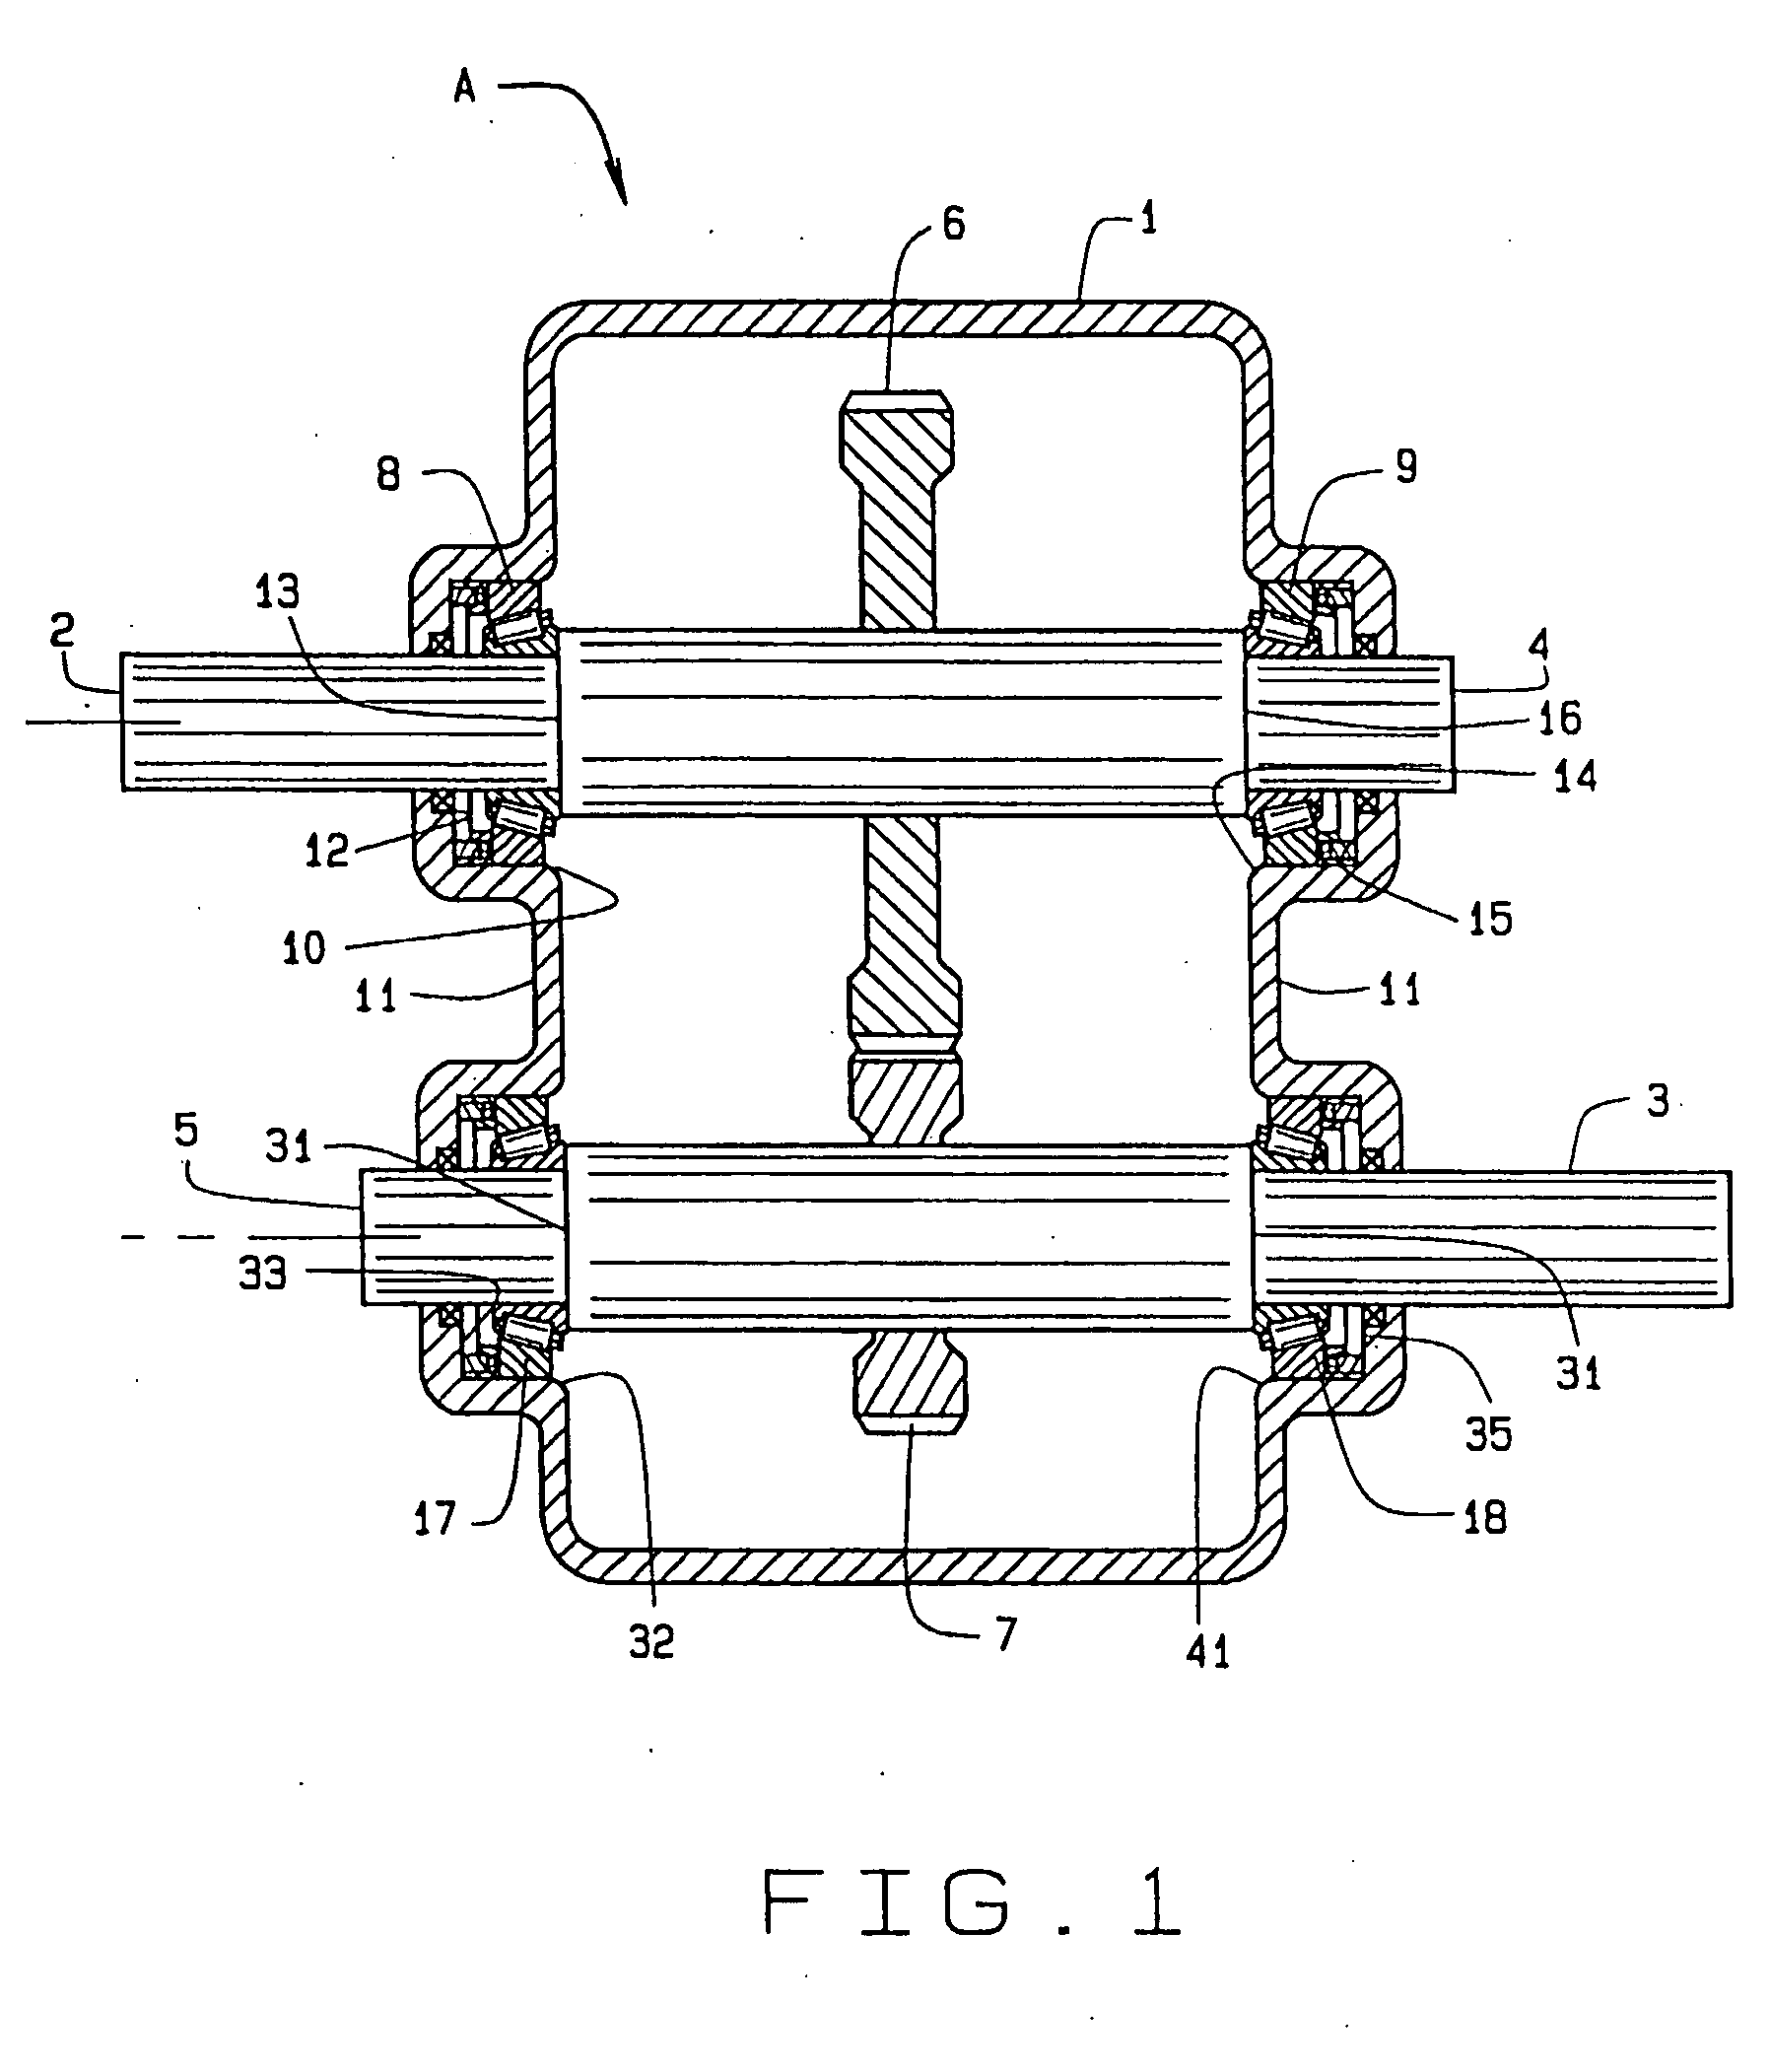 Bearing having thermal compensating capability